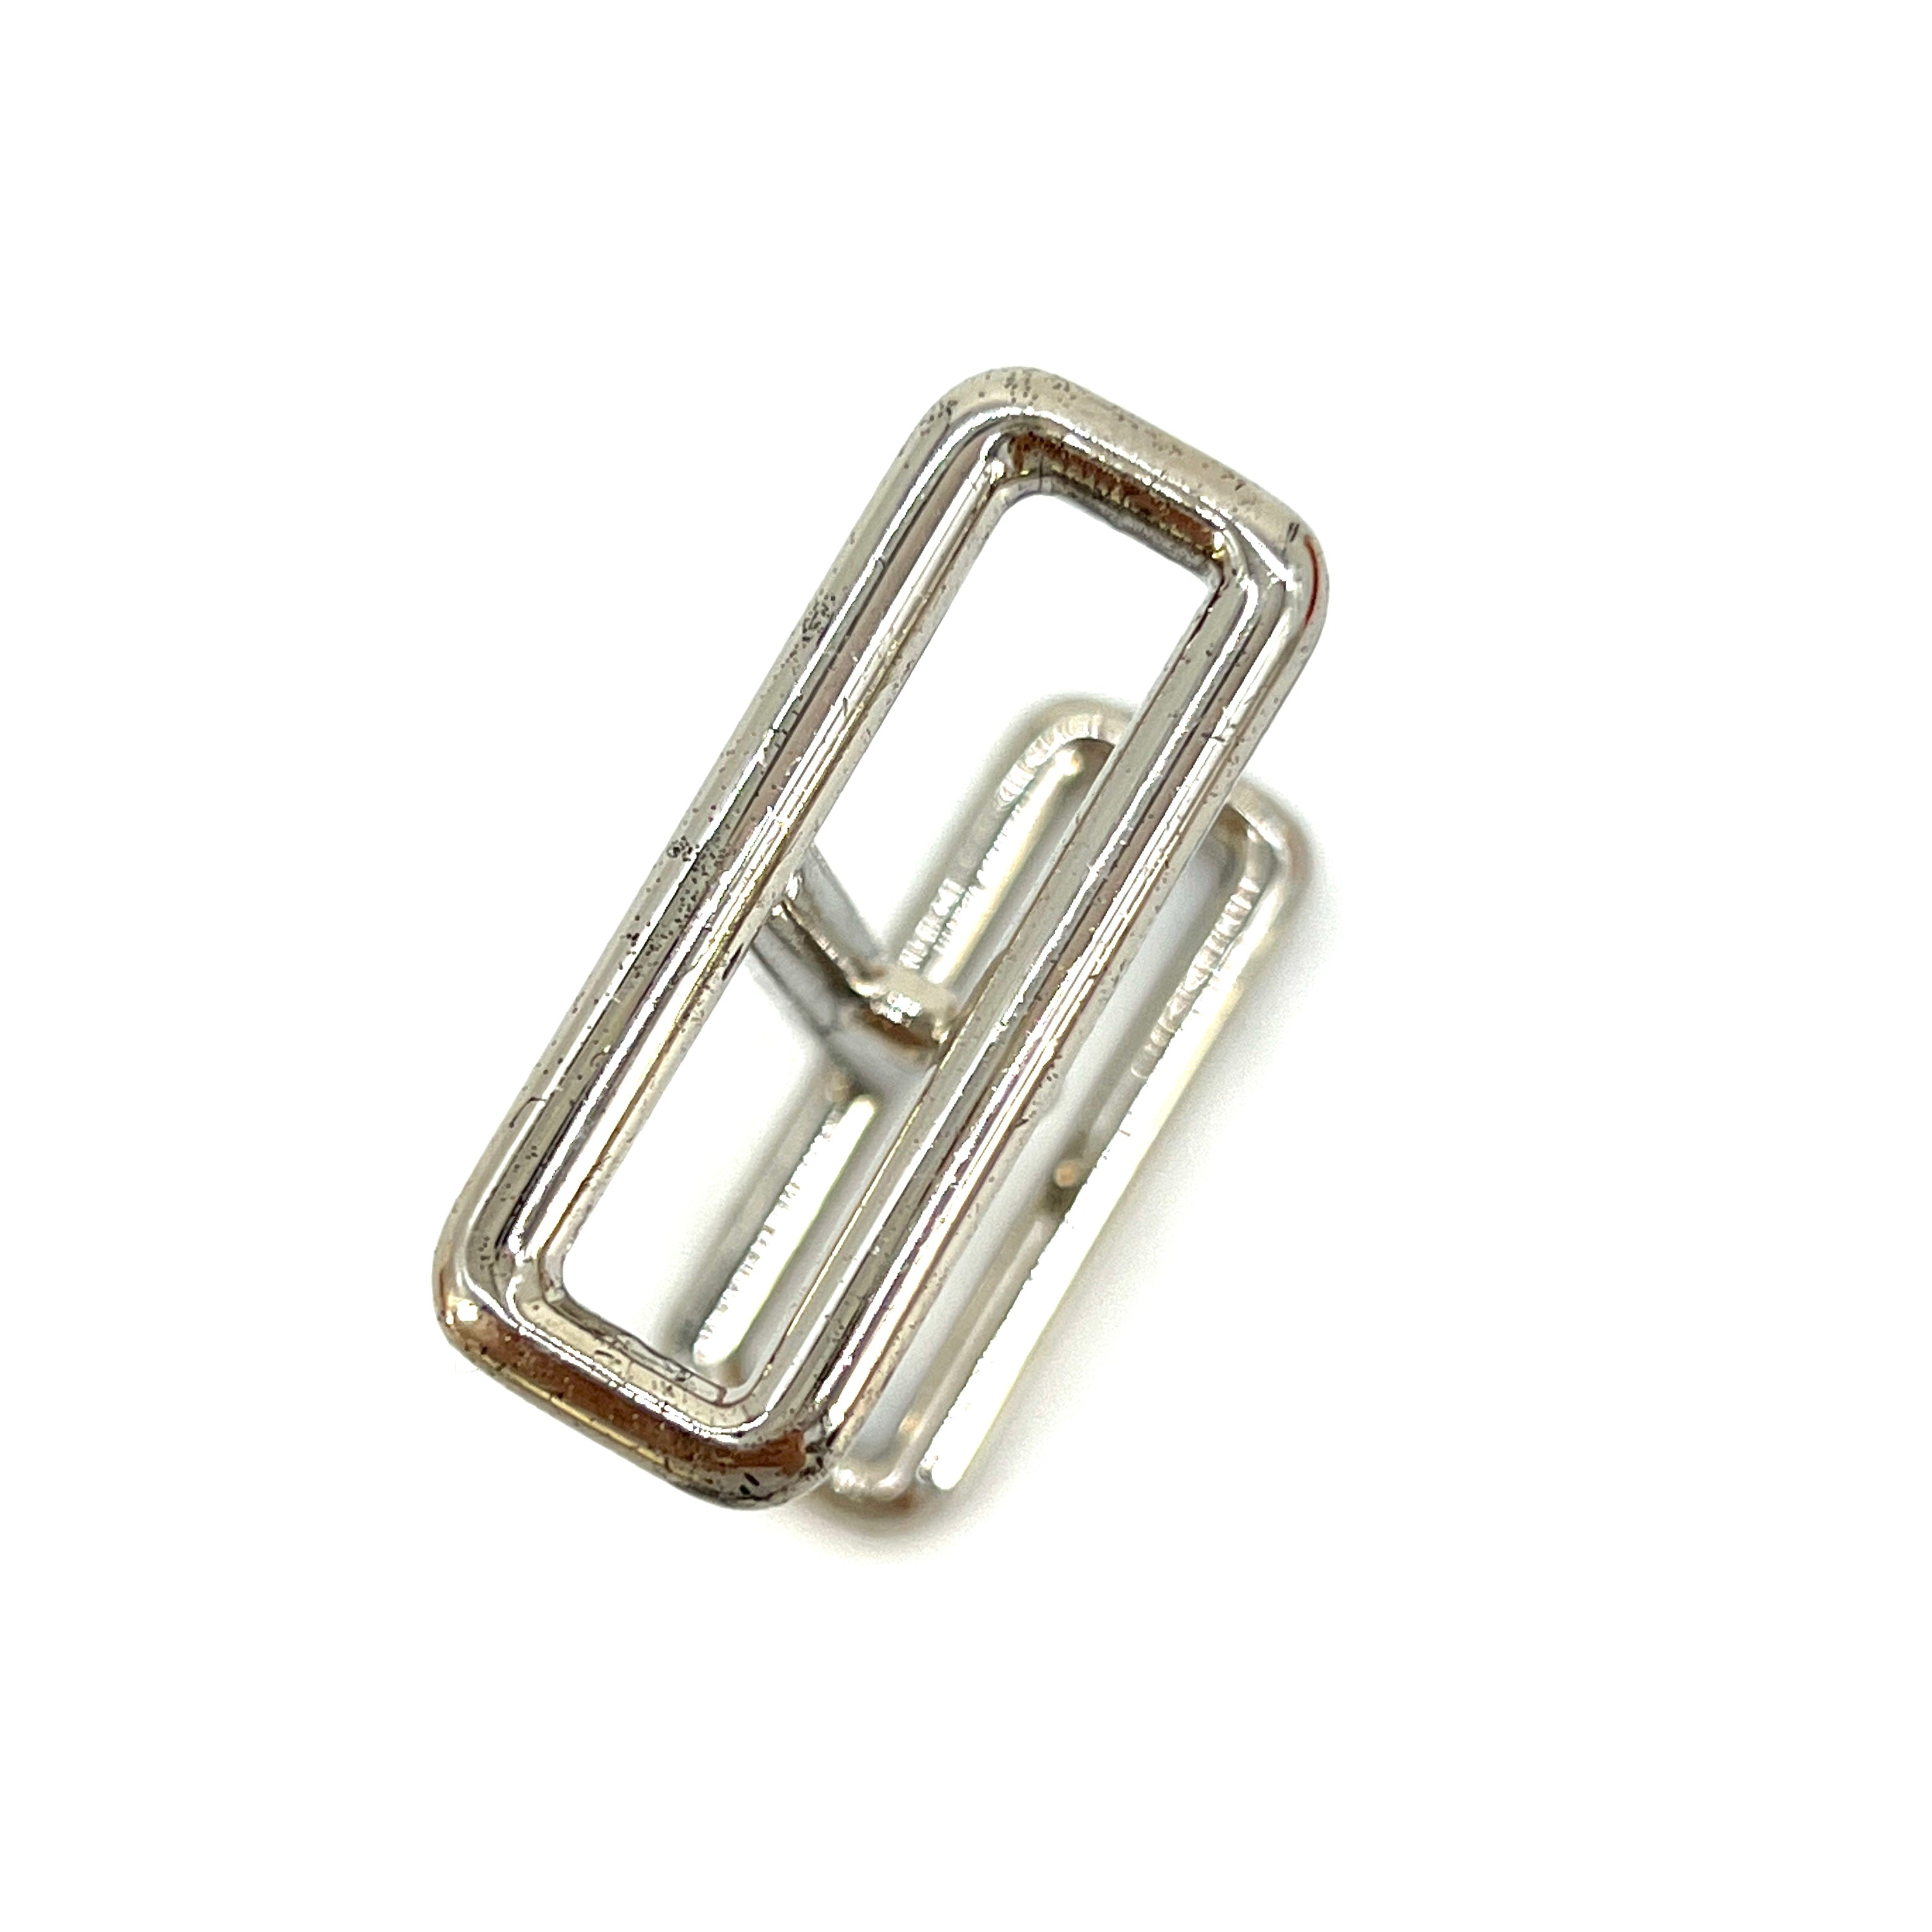 Hermes H Buckle Silver [Guaranteed Authentic]